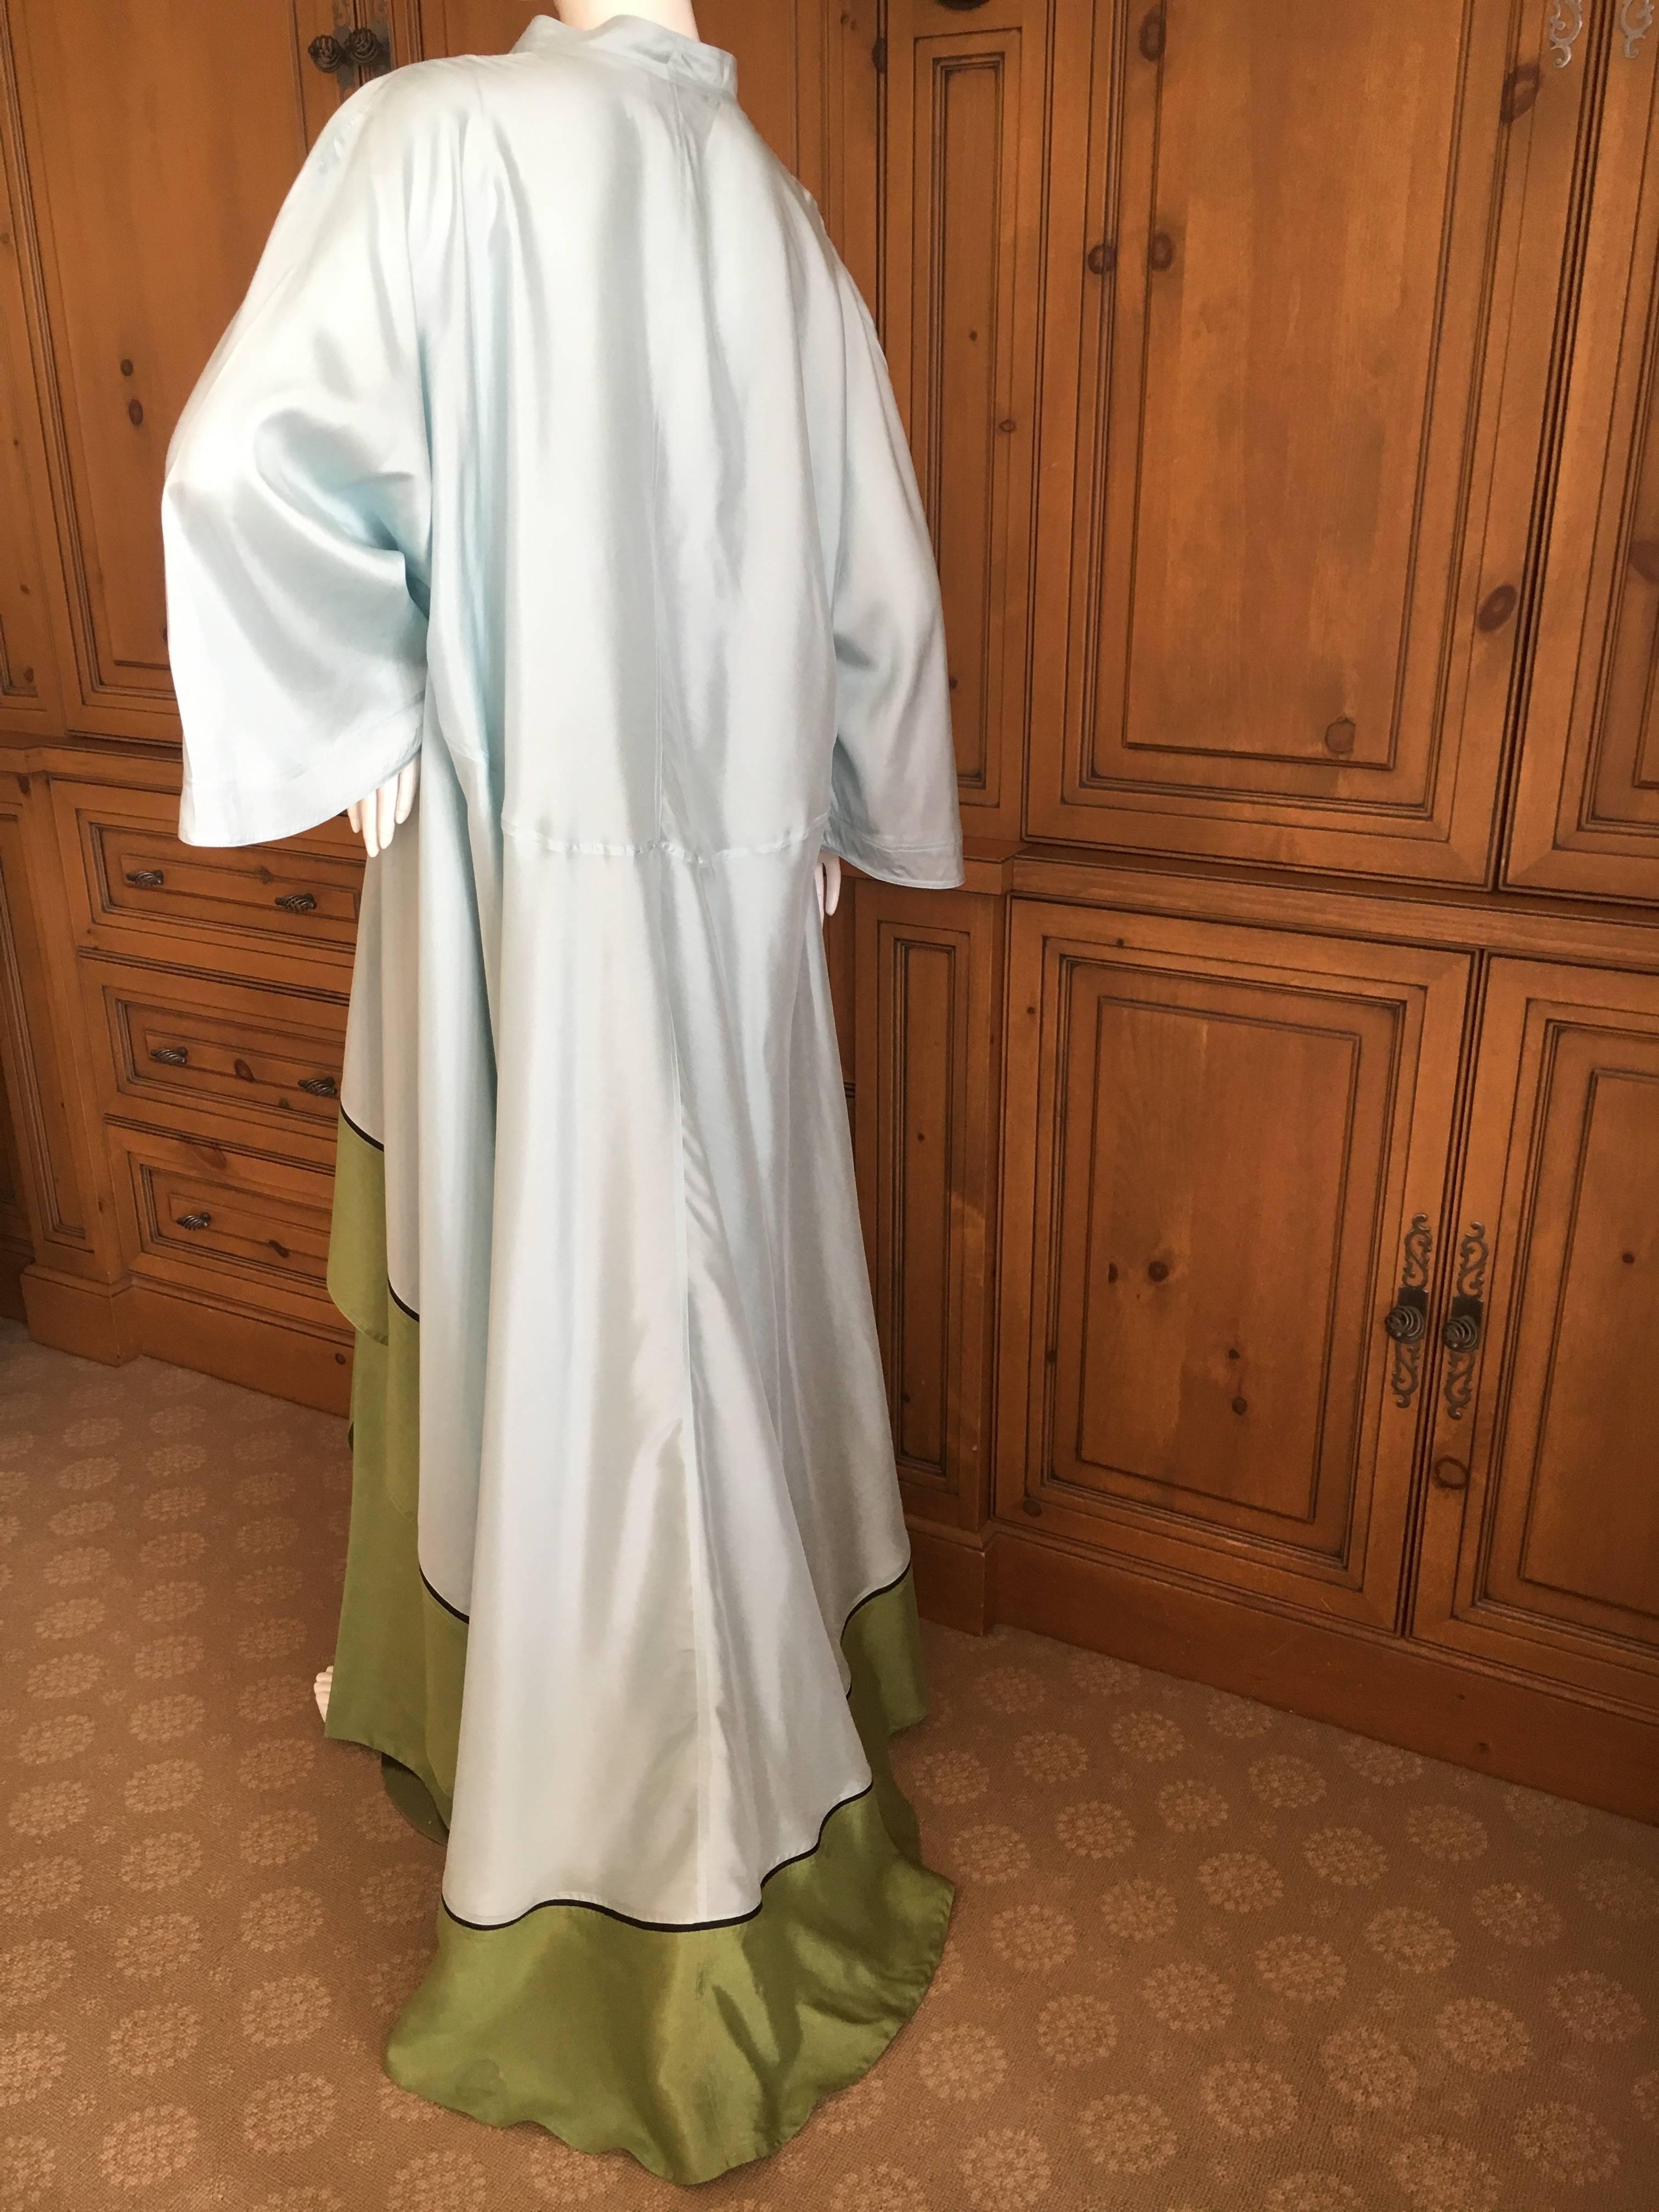 Chado Ralph Rucci Silk Caftan and Matching Wide Leg Pant.
This is so elegant, featuring a very wide leg pant that has a skirt like wrap feature, and a matching caftan that is higher in the front, trailing in the back.
Looks and feels amazing